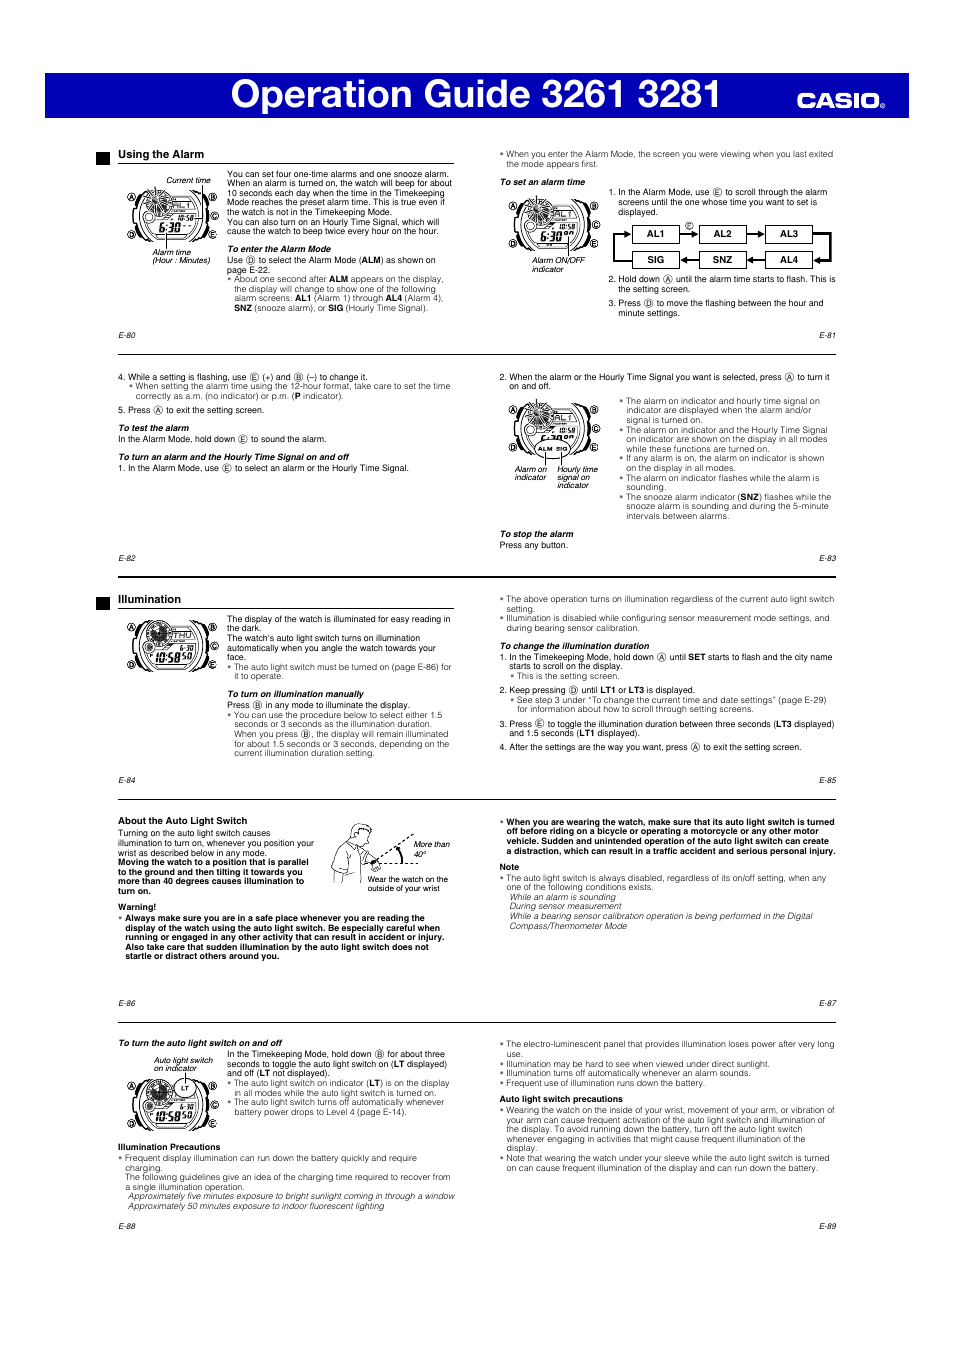 G-Shock G-9300 Manual | Page / 11 | Also for: ;"3281, GW-9300GY-1JF, 3280